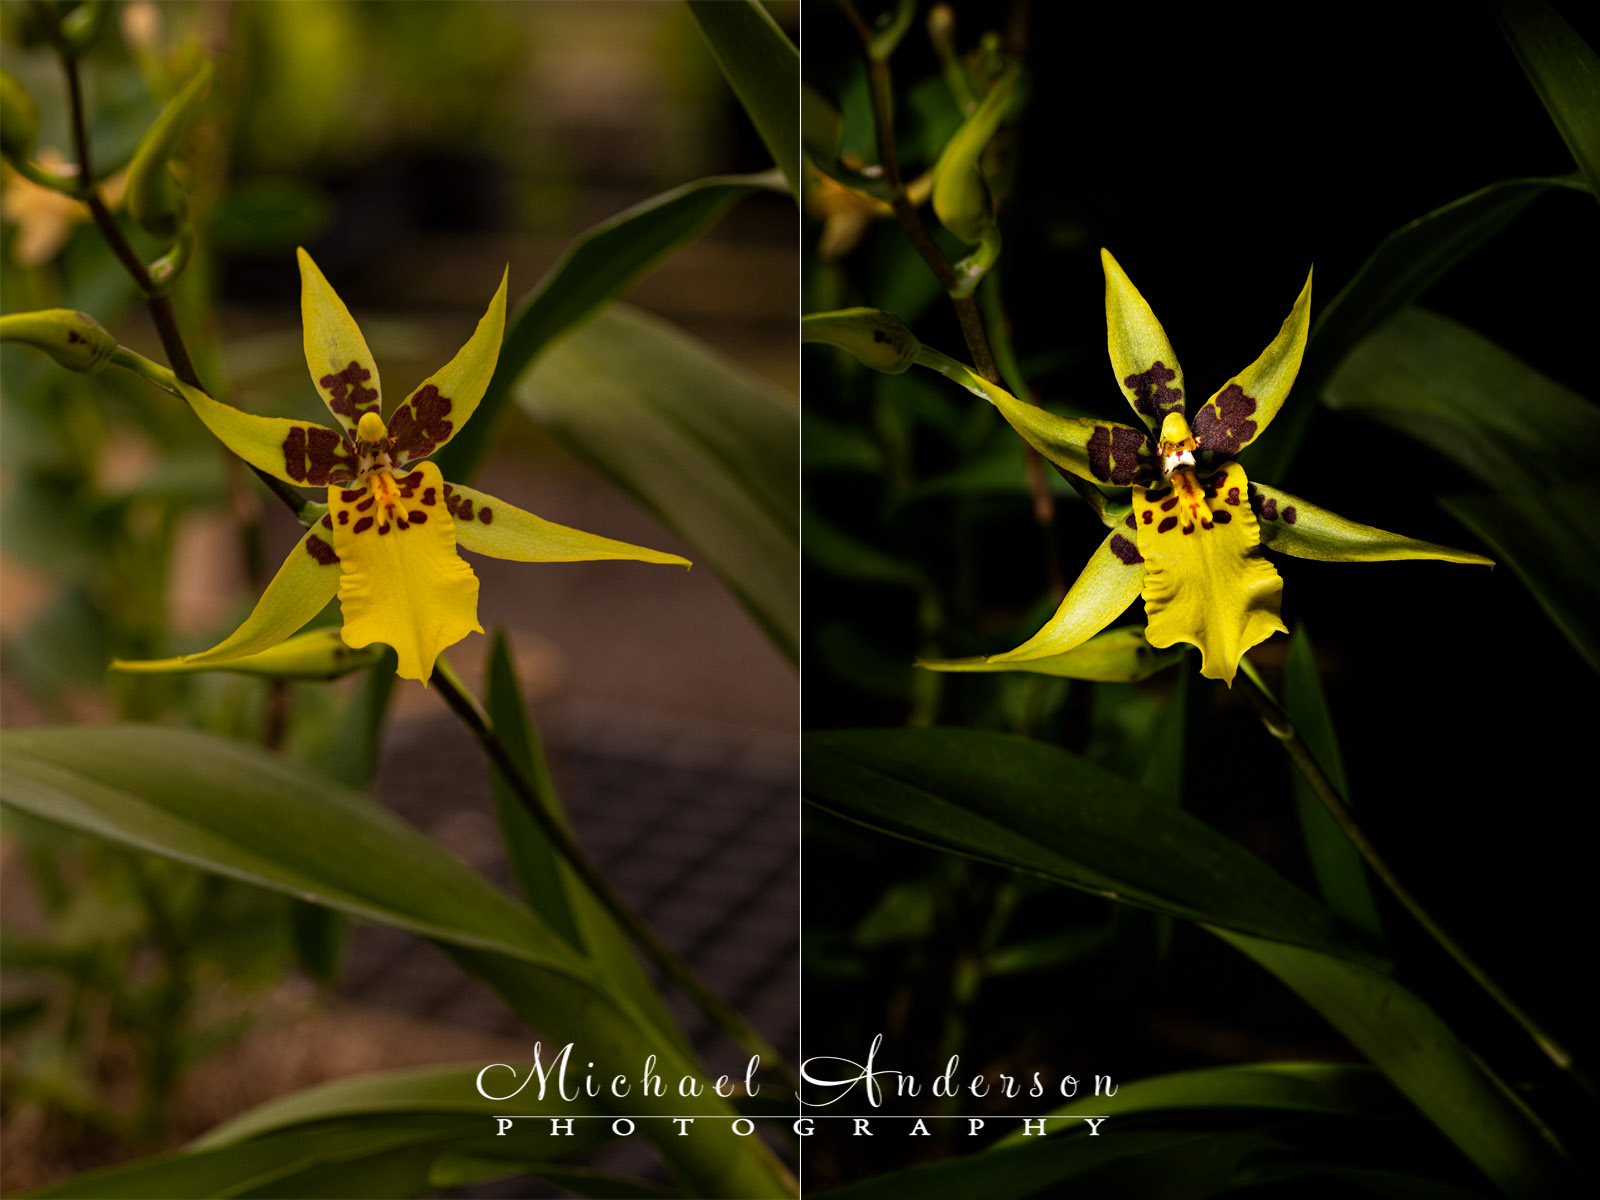 The before and after light painting photos of a Brassidium Gilded Urchin Ontario Orchid.